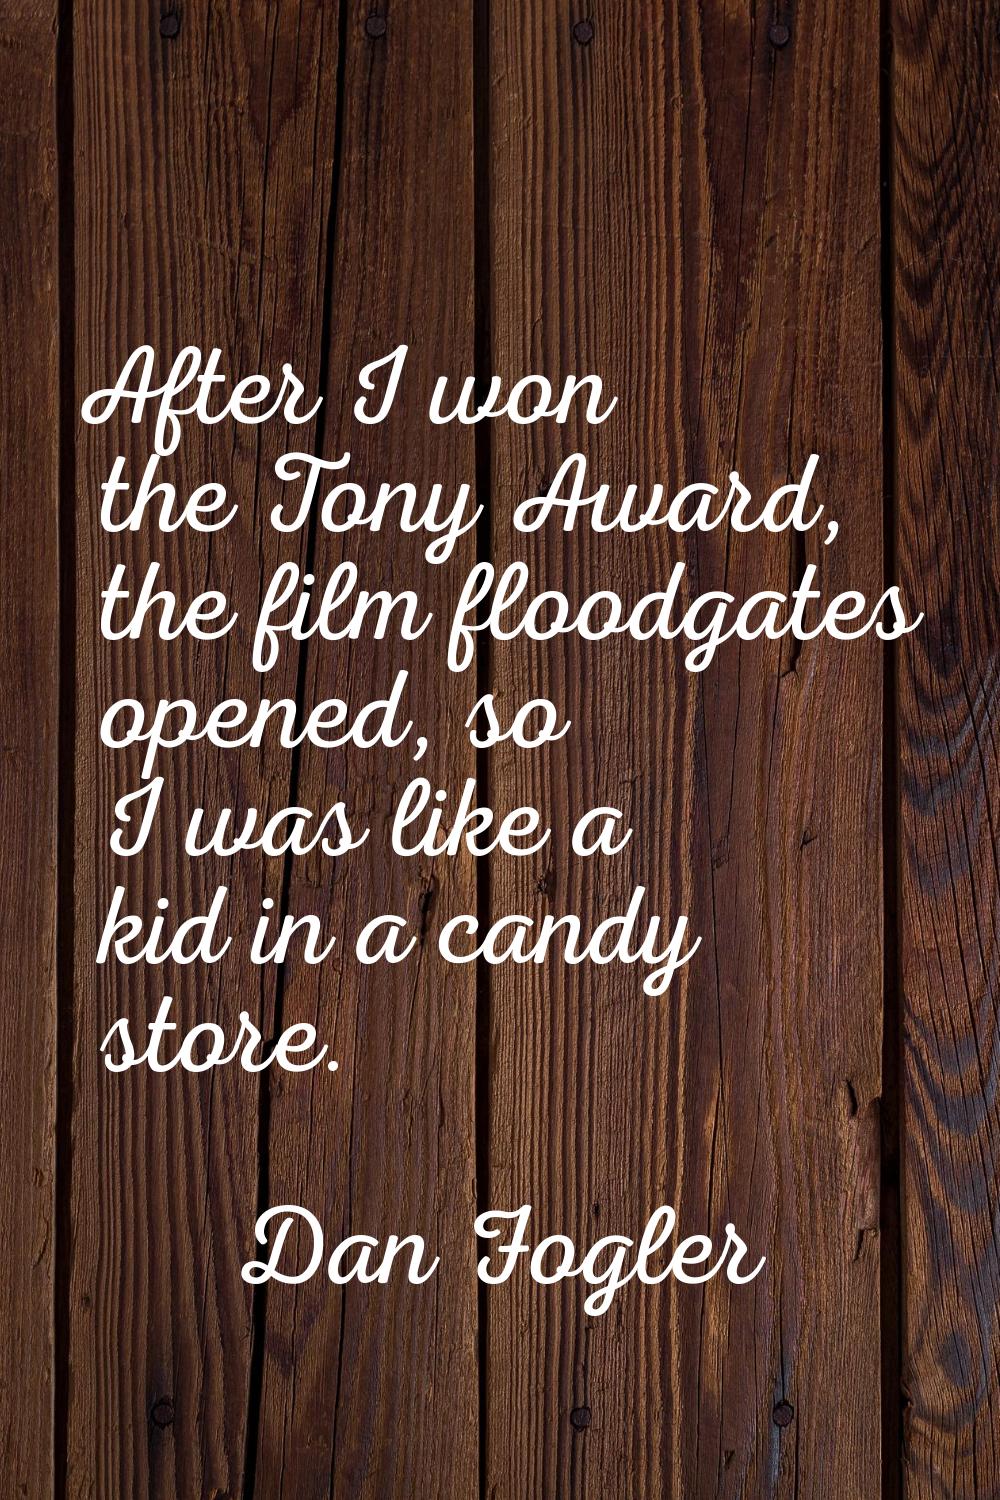 After I won the Tony Award, the film floodgates opened, so I was like a kid in a candy store.